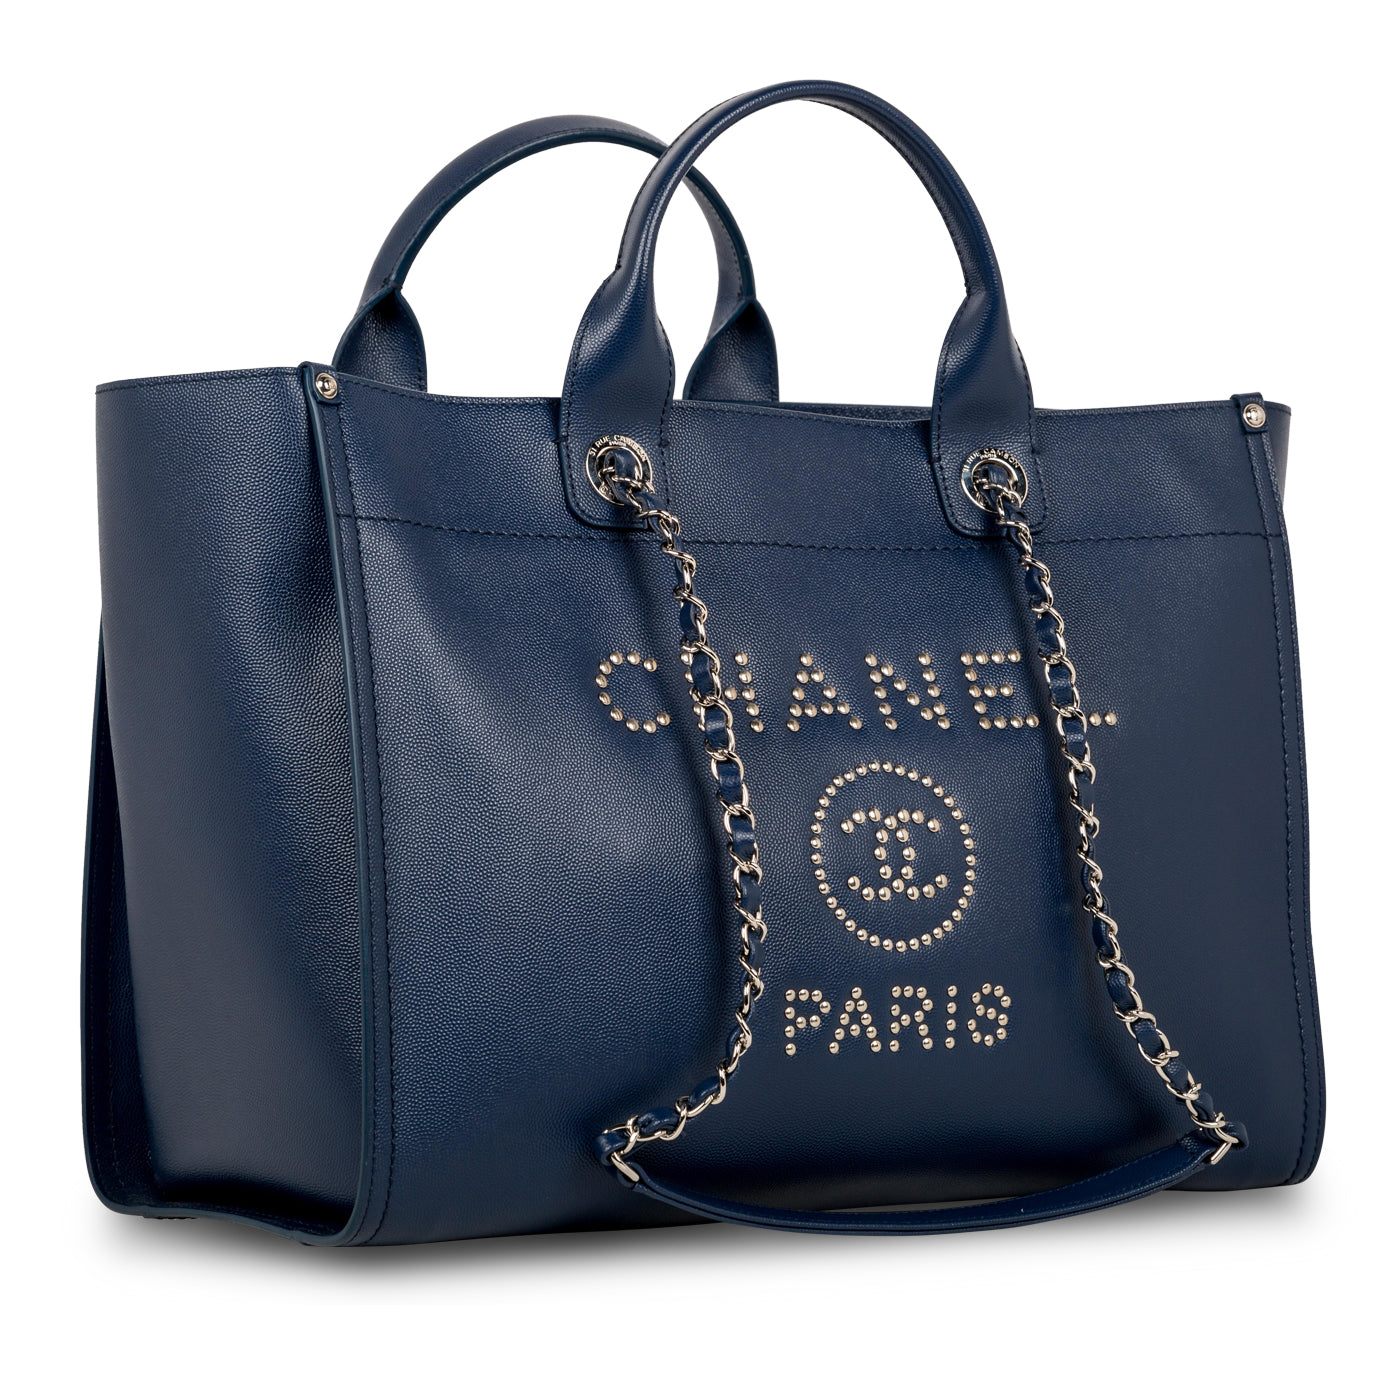 CHANEL LARGE DEAUVILLE Gst Navy Stripe Canvas Toile Shopping Tote